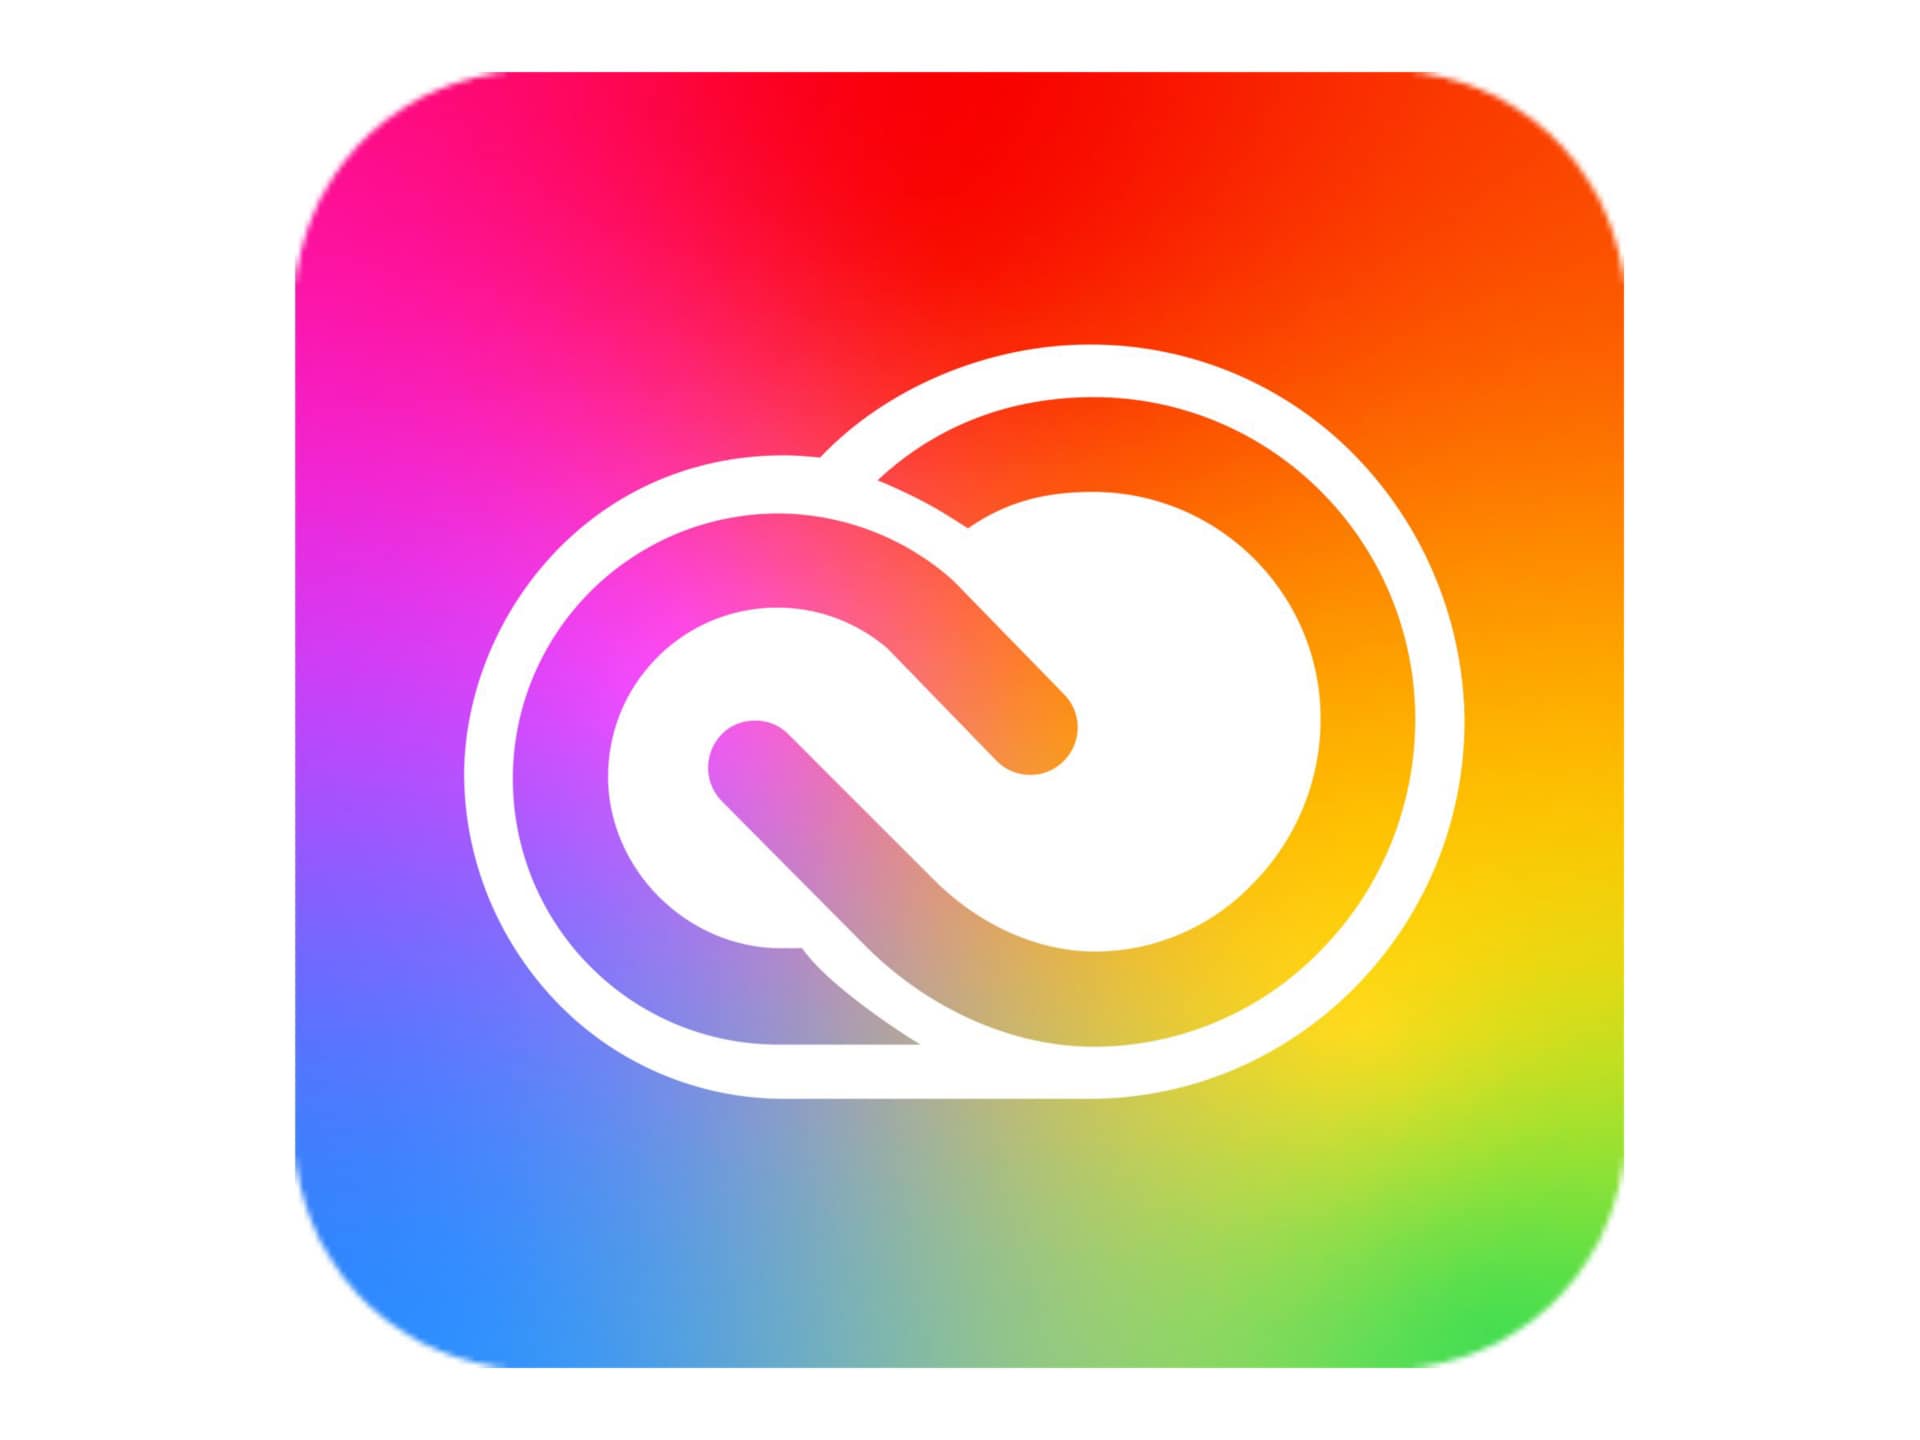 Adobe Creative Cloud for Enterprise - All Apps - Subscription New (8 months